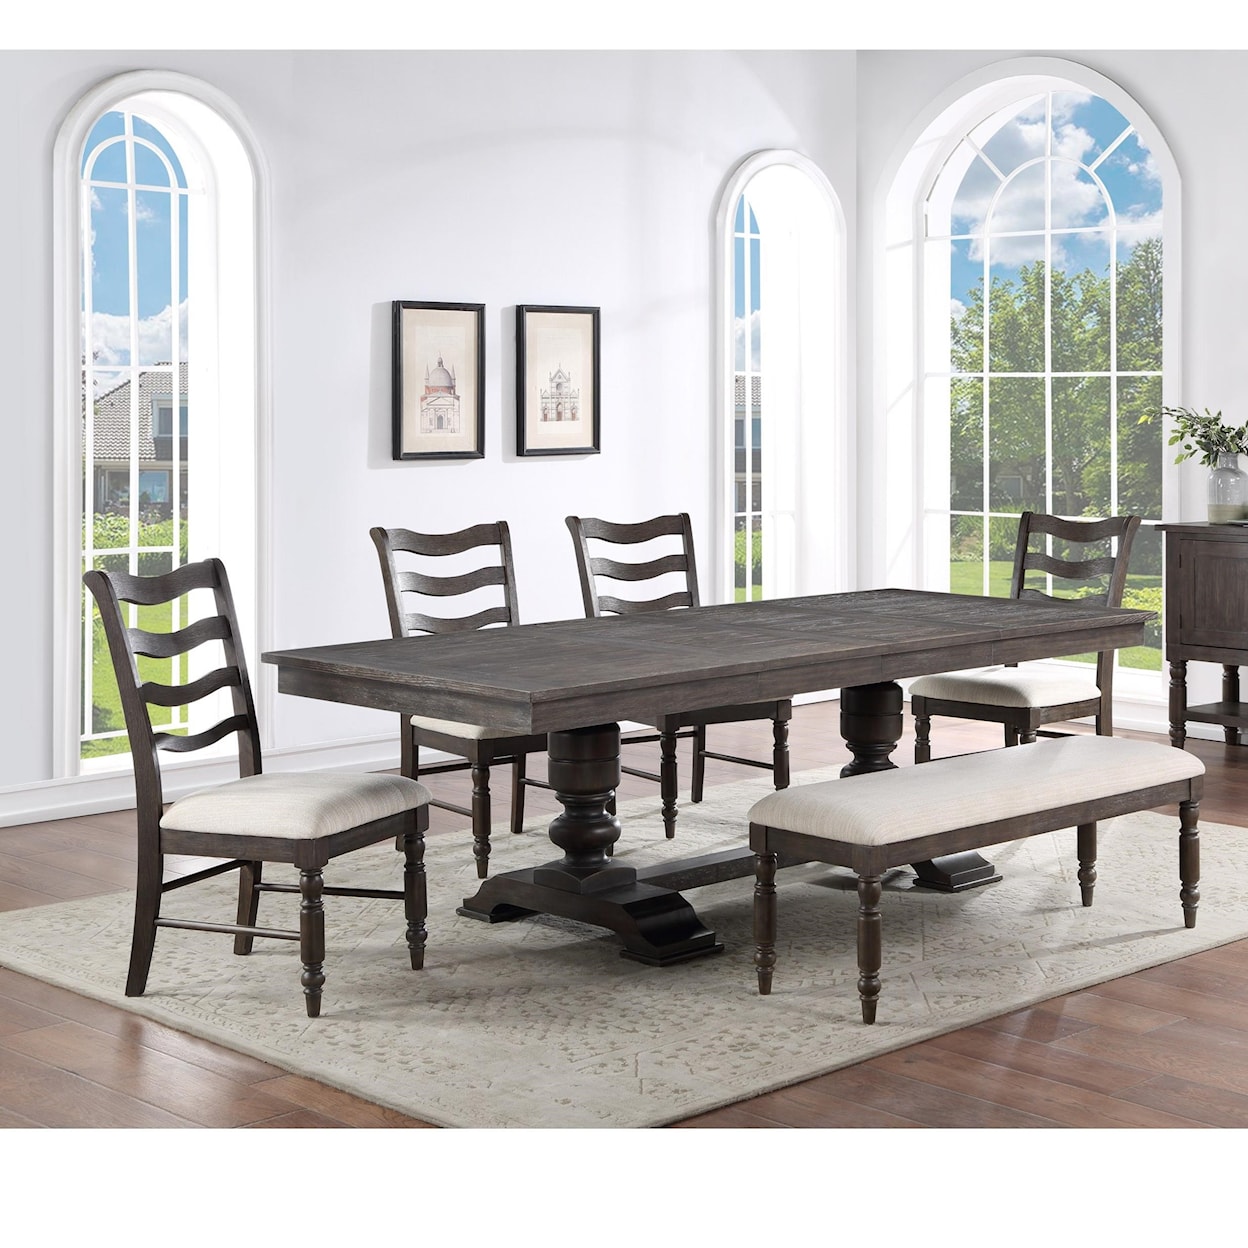 Prime Hutchins Table & Chair Set with Bench